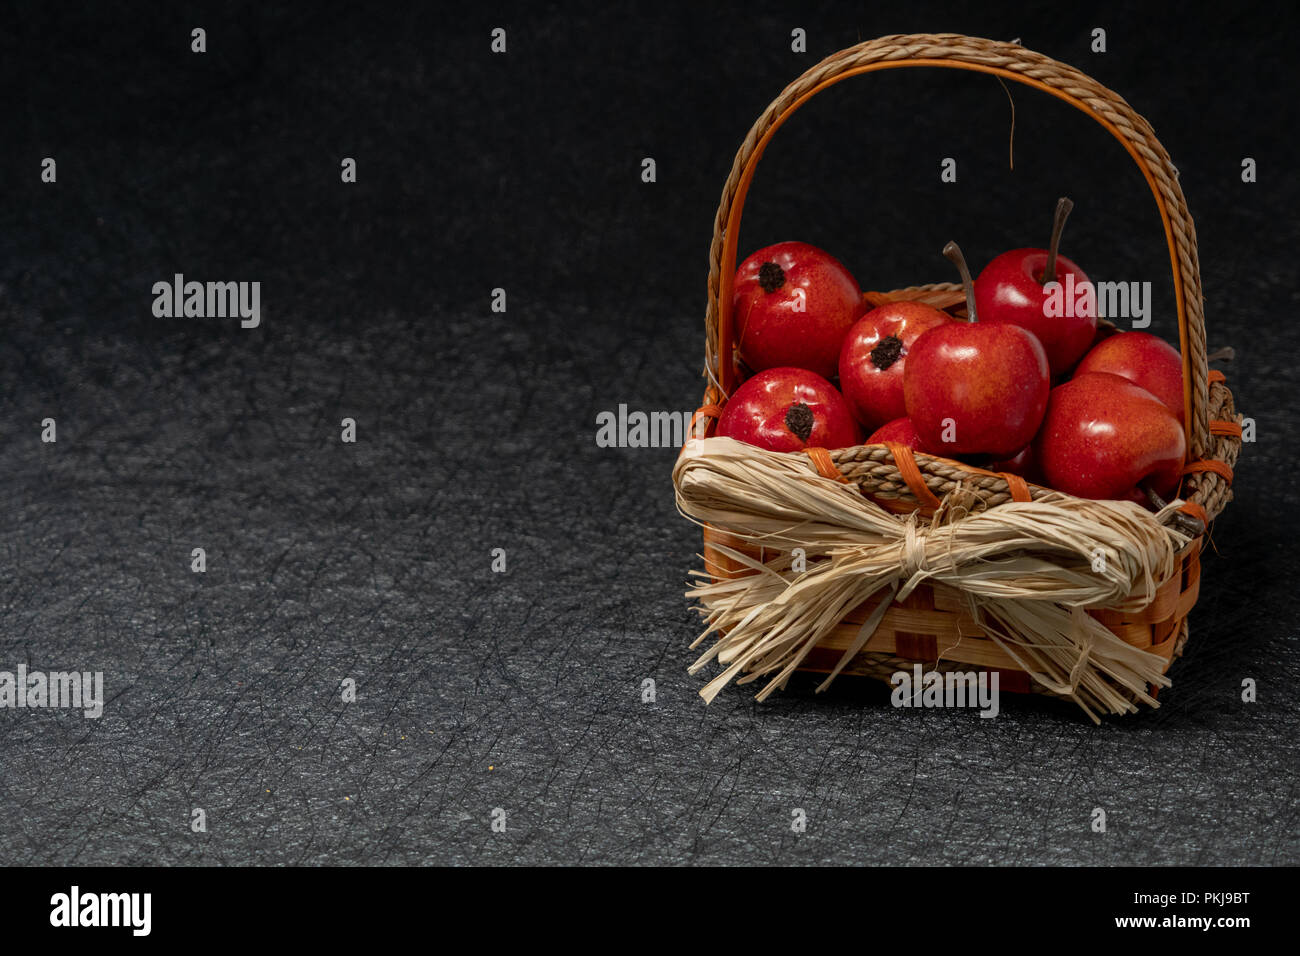 Apples in a straw basket over a black background. Fall and autumn concept Stock Photo